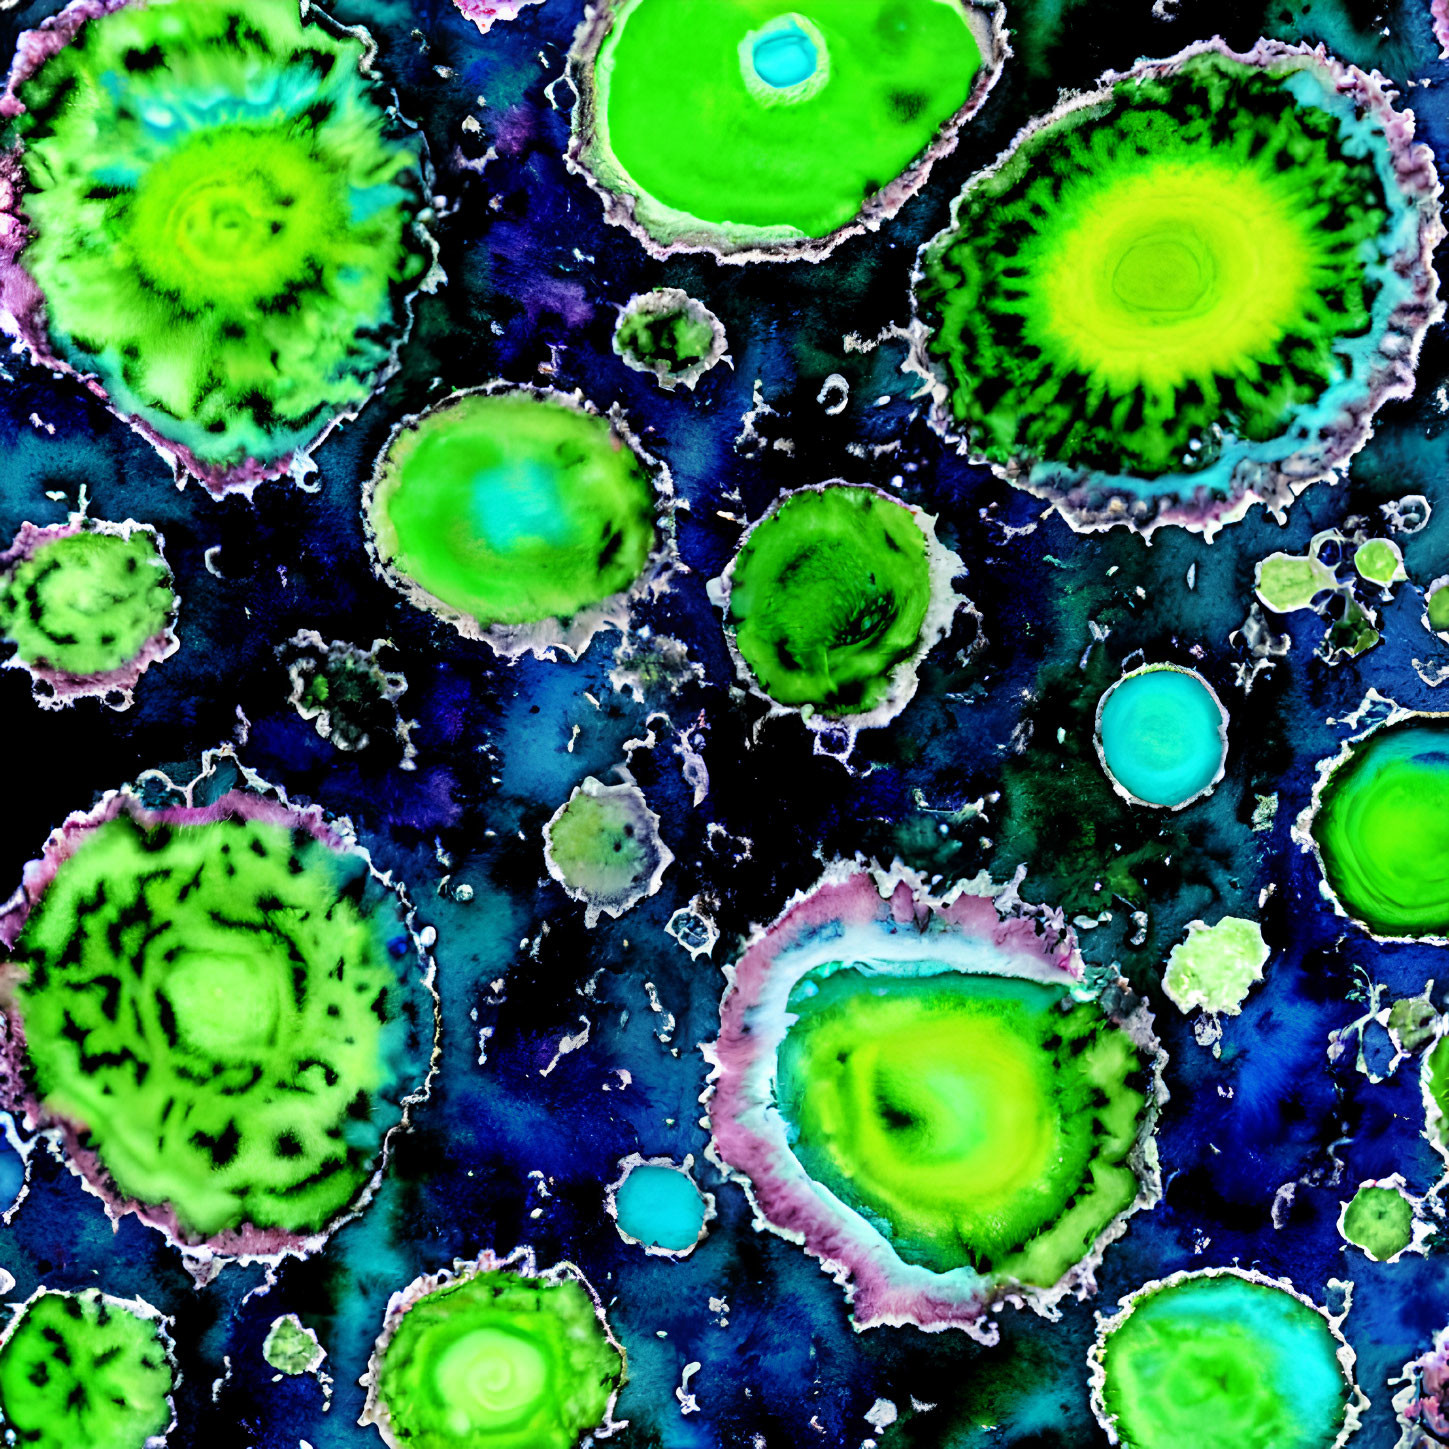 Vibrant abstract pattern of green, blue, and pink cells on dark background